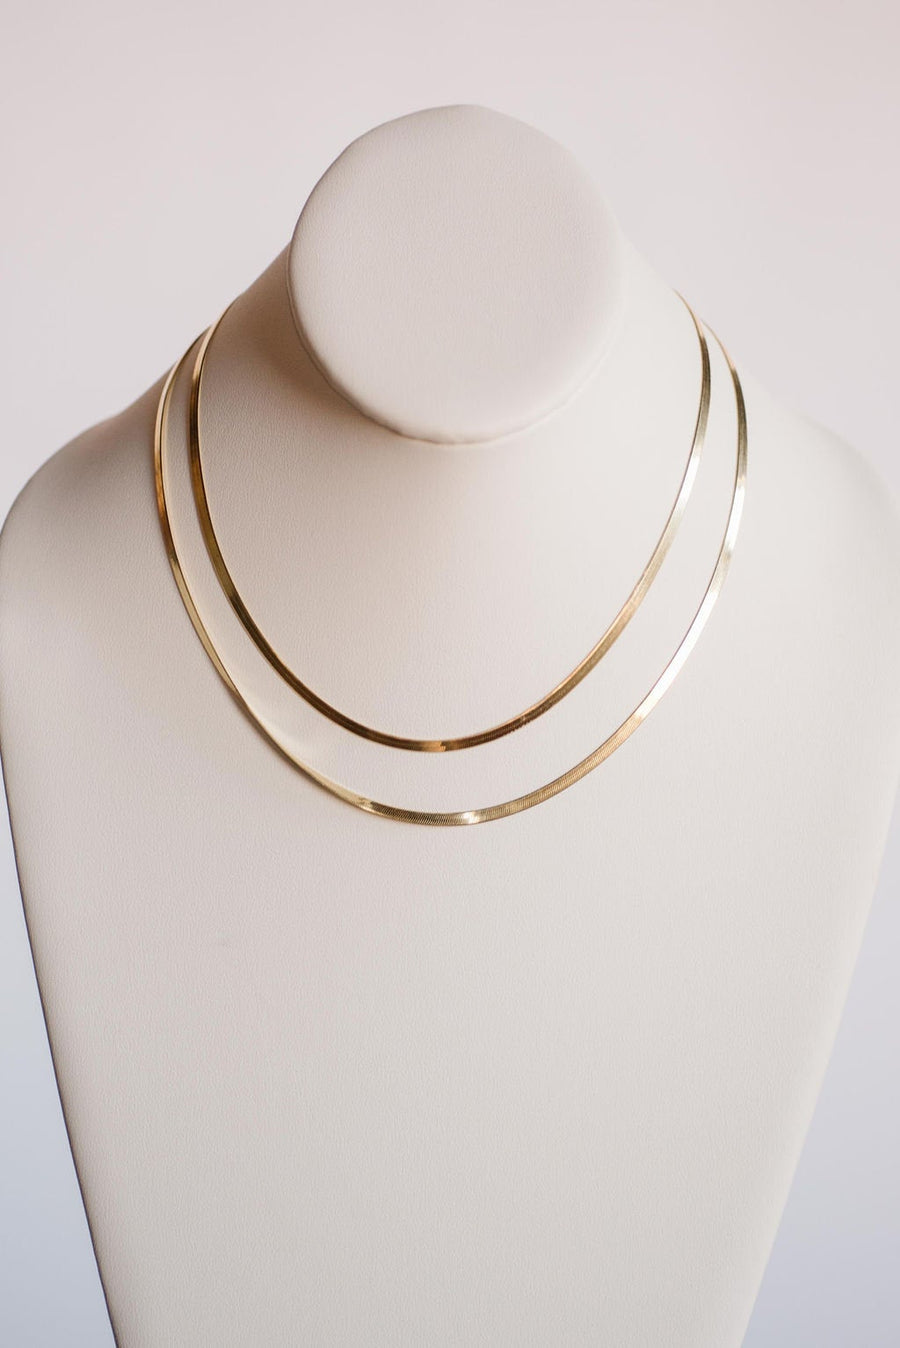 Herringbone Chain, Snake Chain, 18k Gold Vermeil, Gold Necklace, Sterling Silver, Mother&#39;s Day, Layering Jewelry, Gifts for Her, Birthday